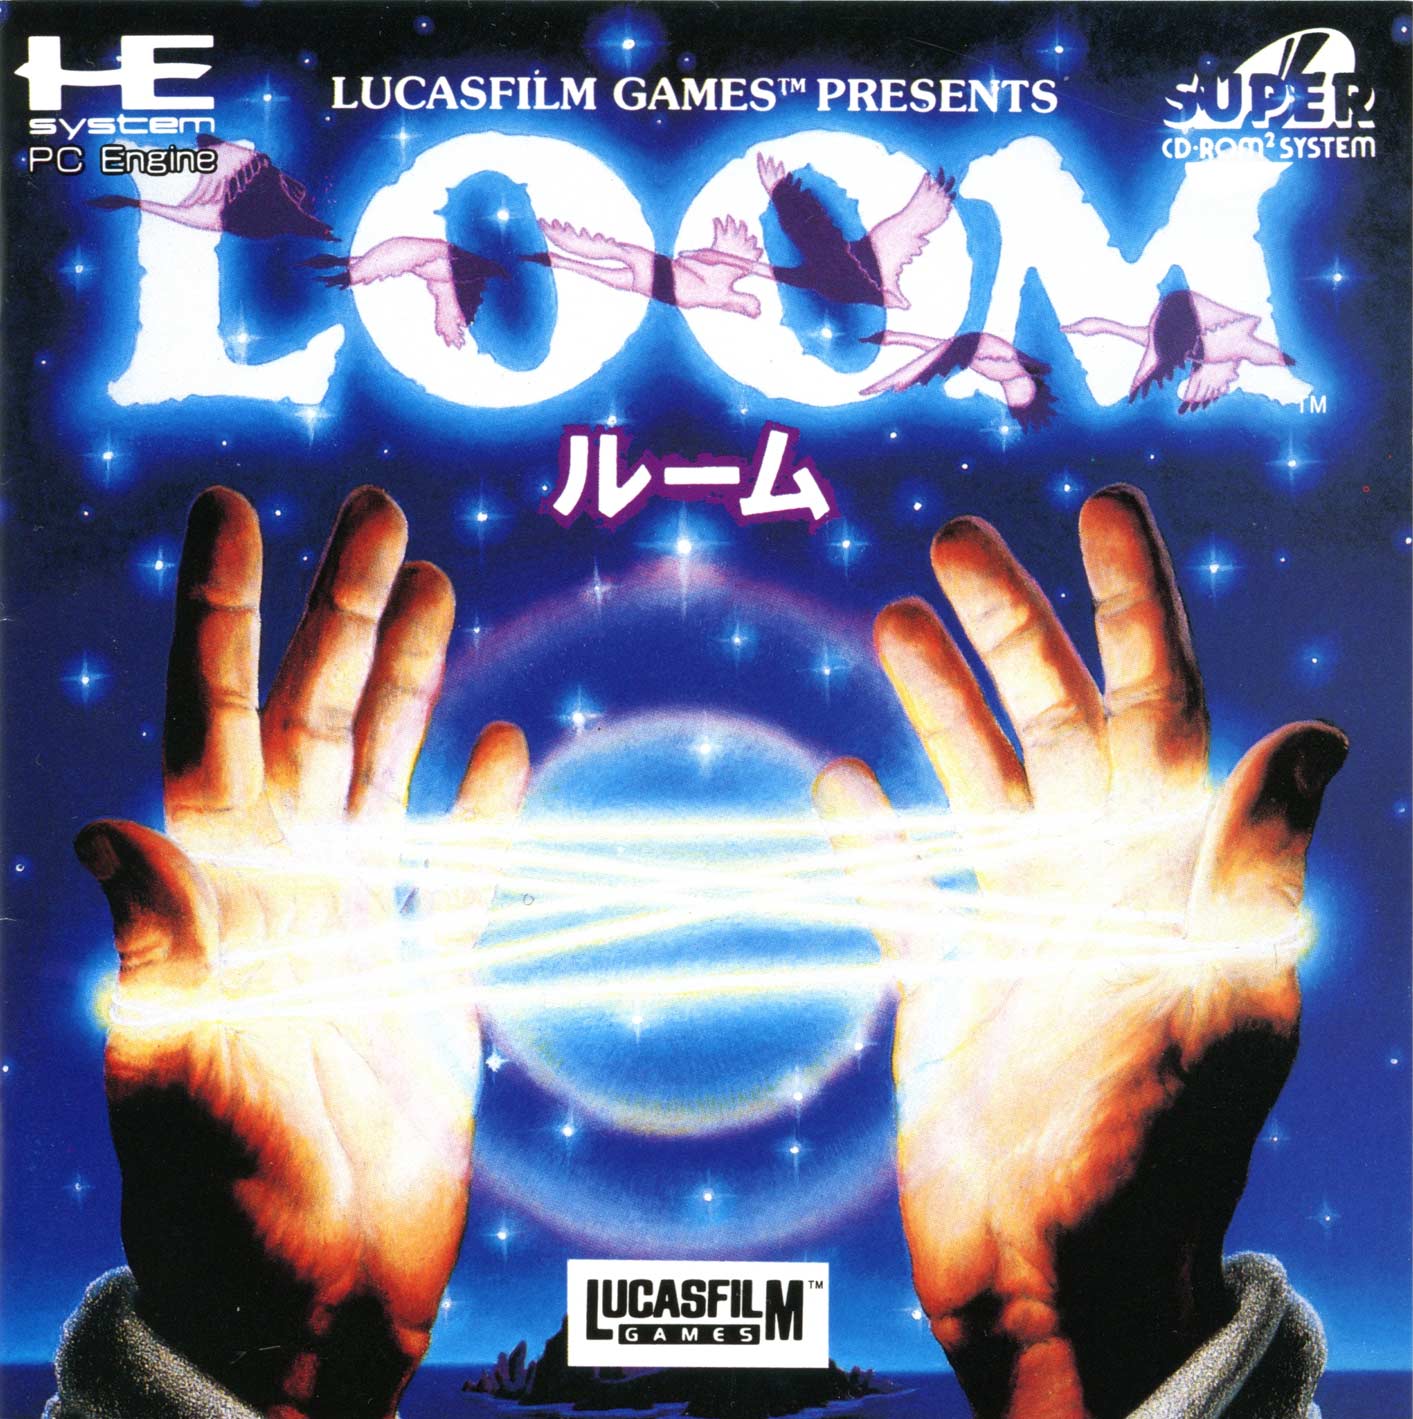 Loom - The PC Engine Software Bible